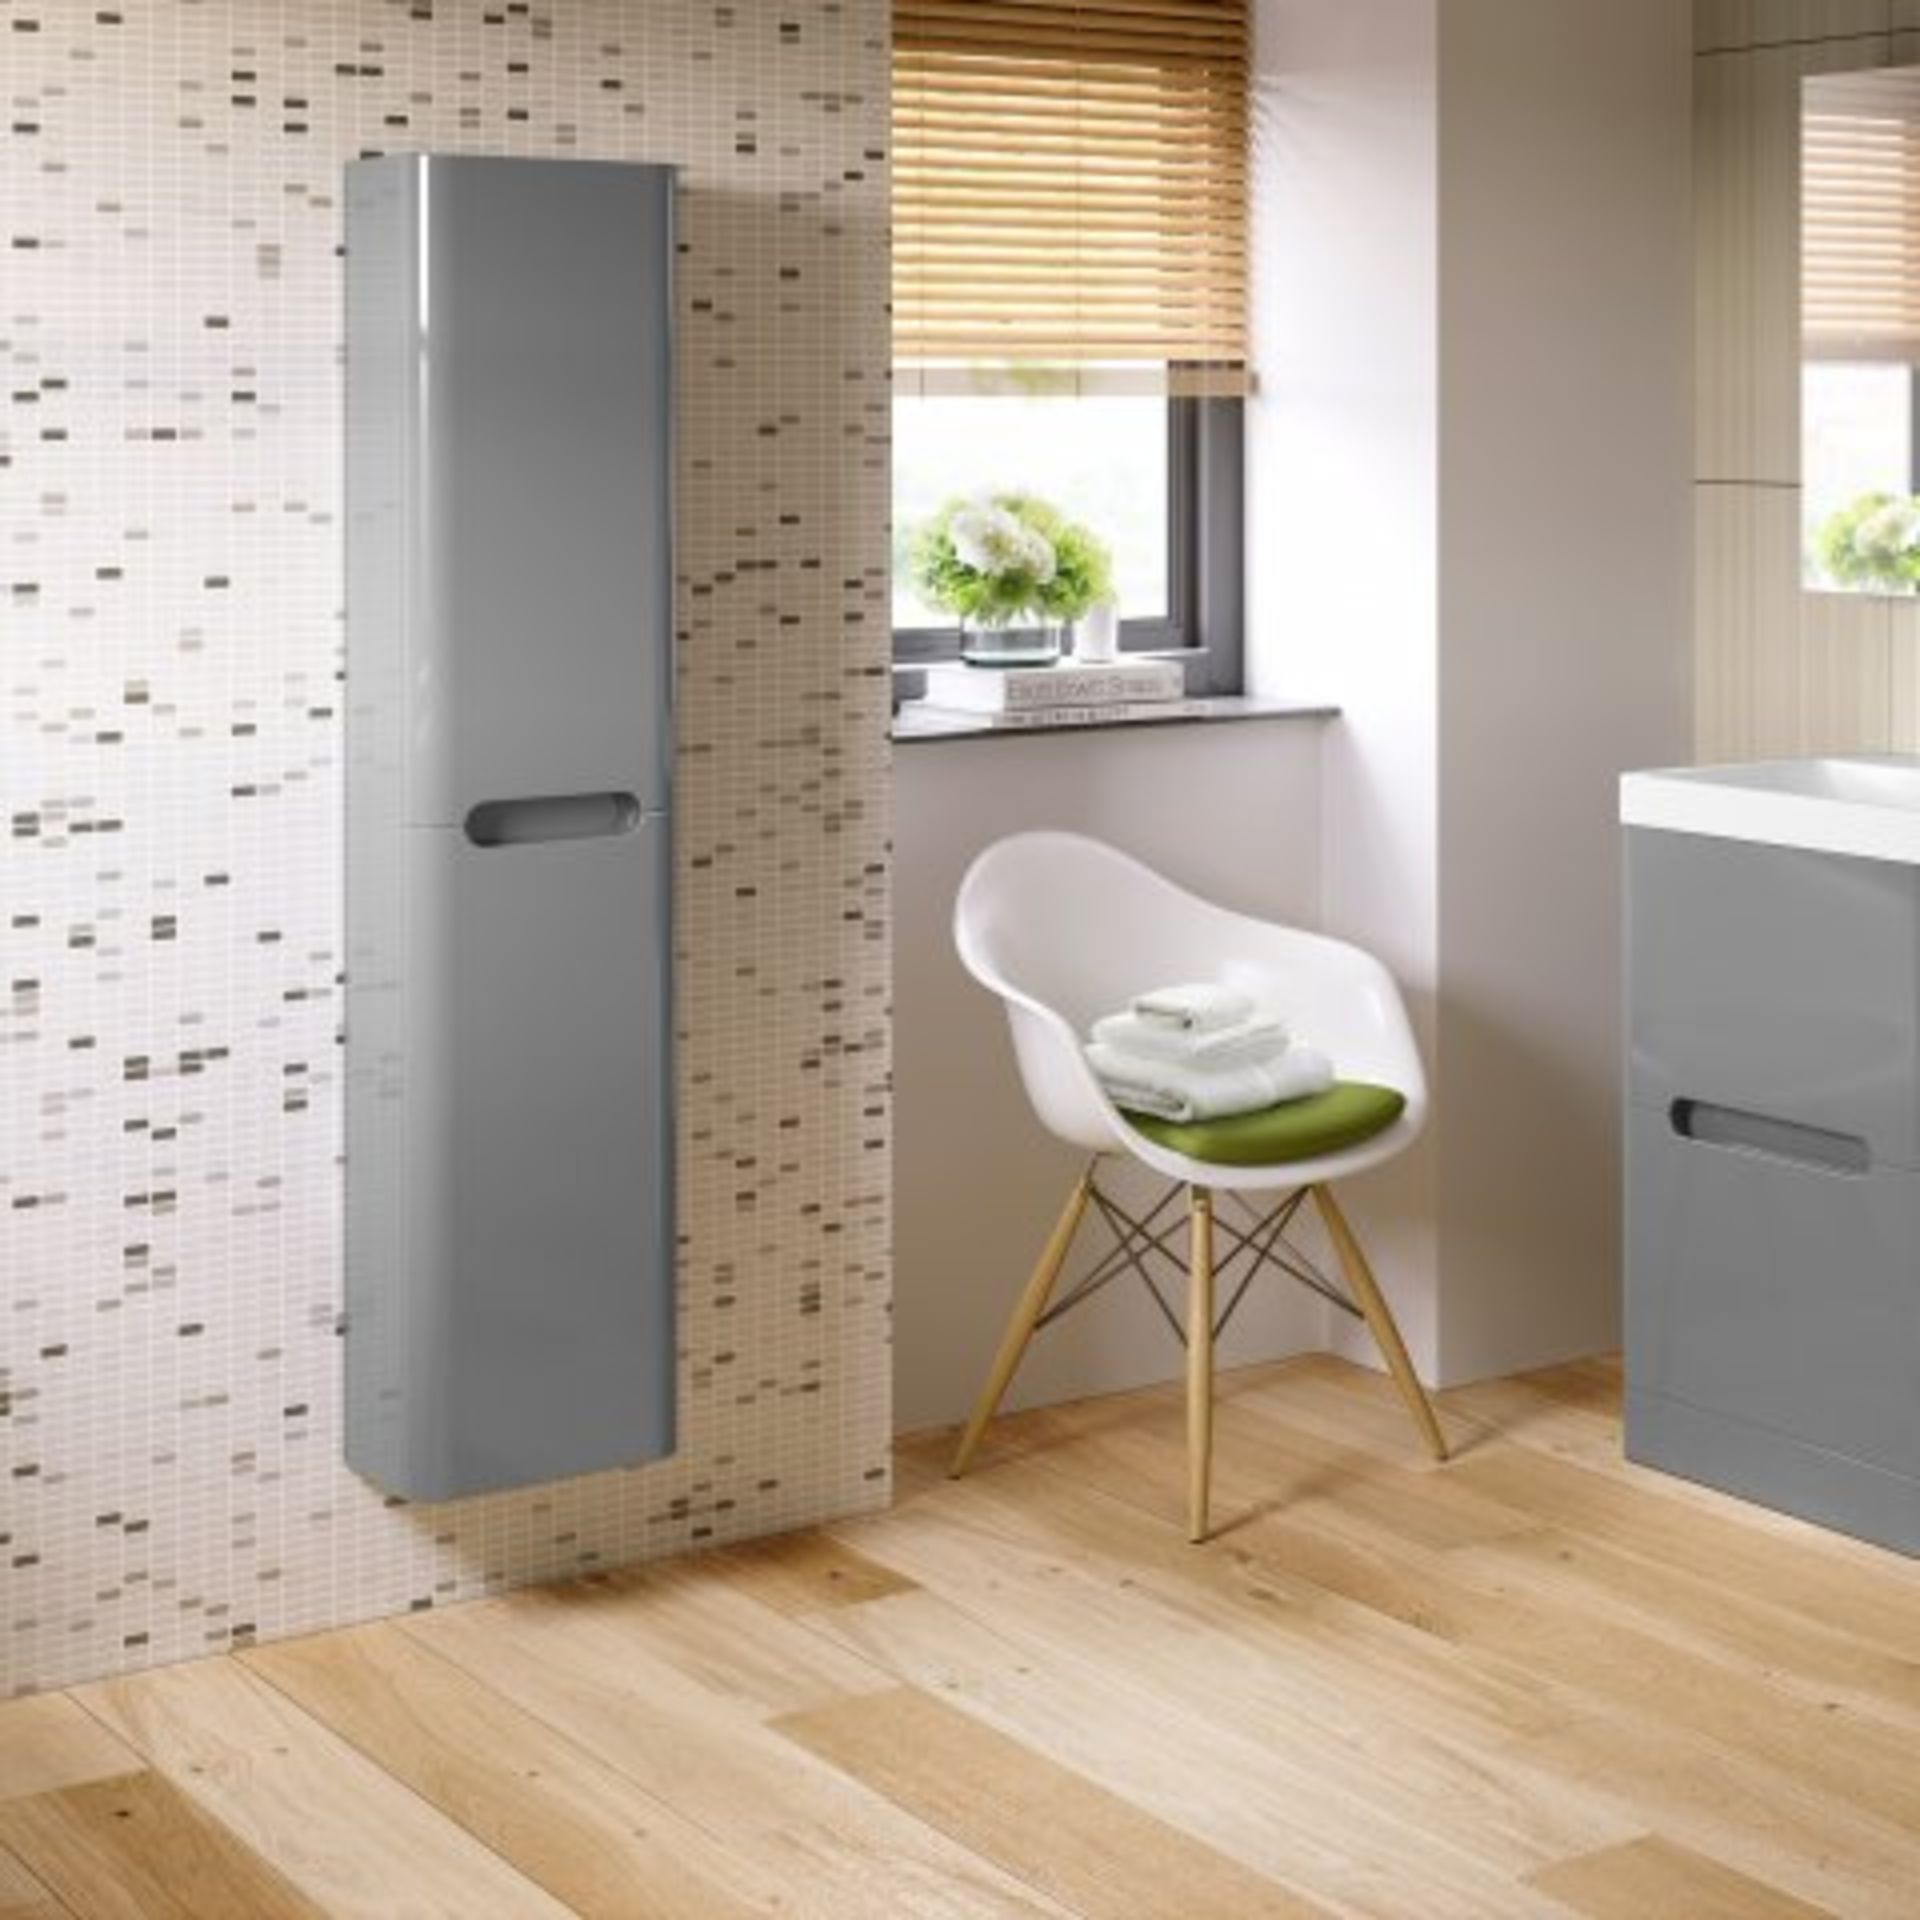 (SKU40) 1400mm Tuscany Gloss Grey Tall Storage Cabinet - Wall Hung. RRP £299.99. With its - Image 3 of 3